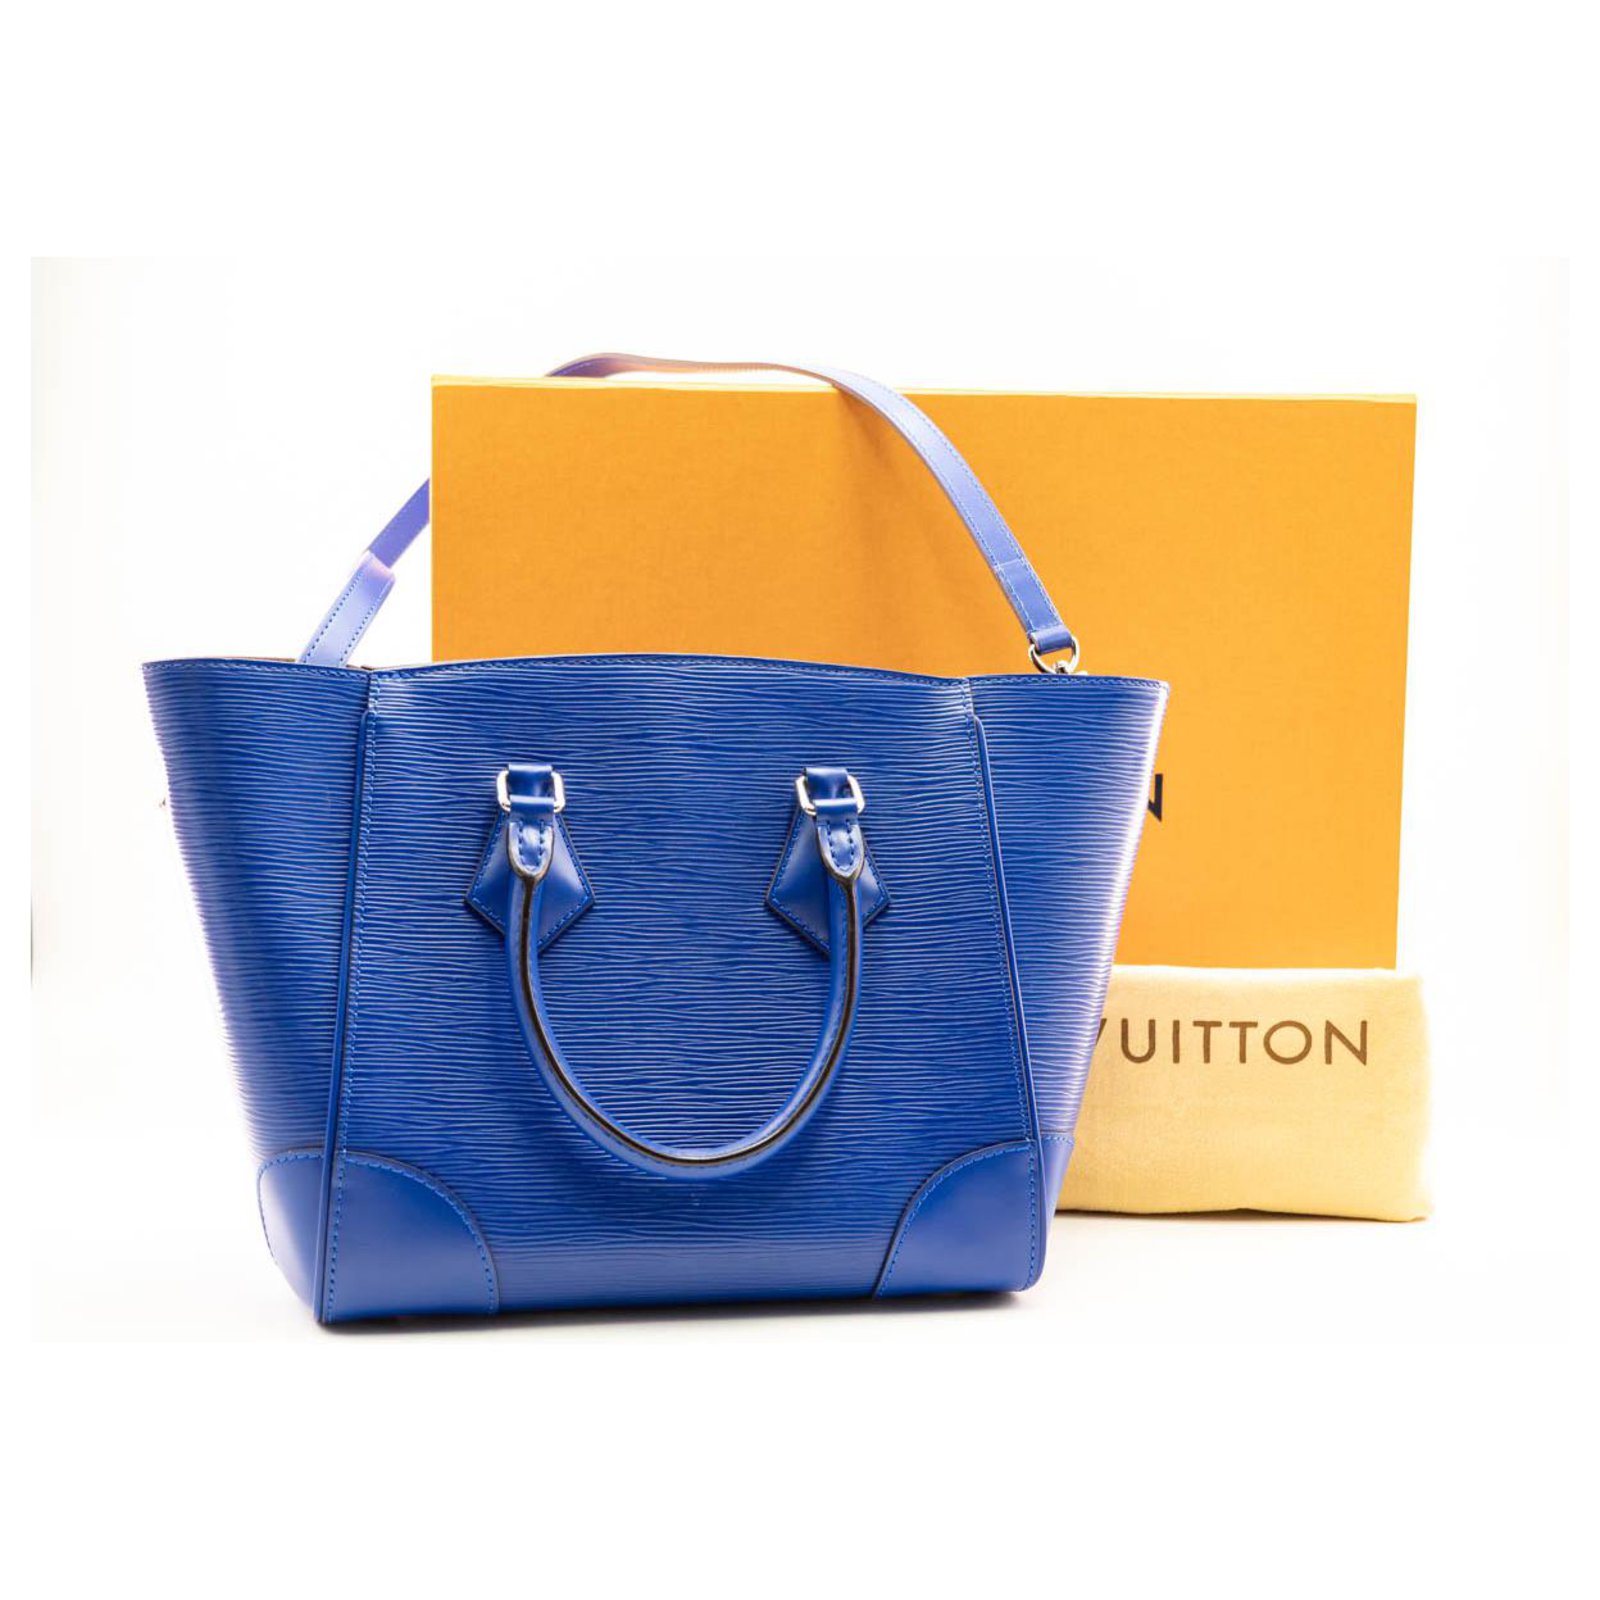 Louis Vuitton Pre-owned Women's Leather Tote Bag - Blue - One Size